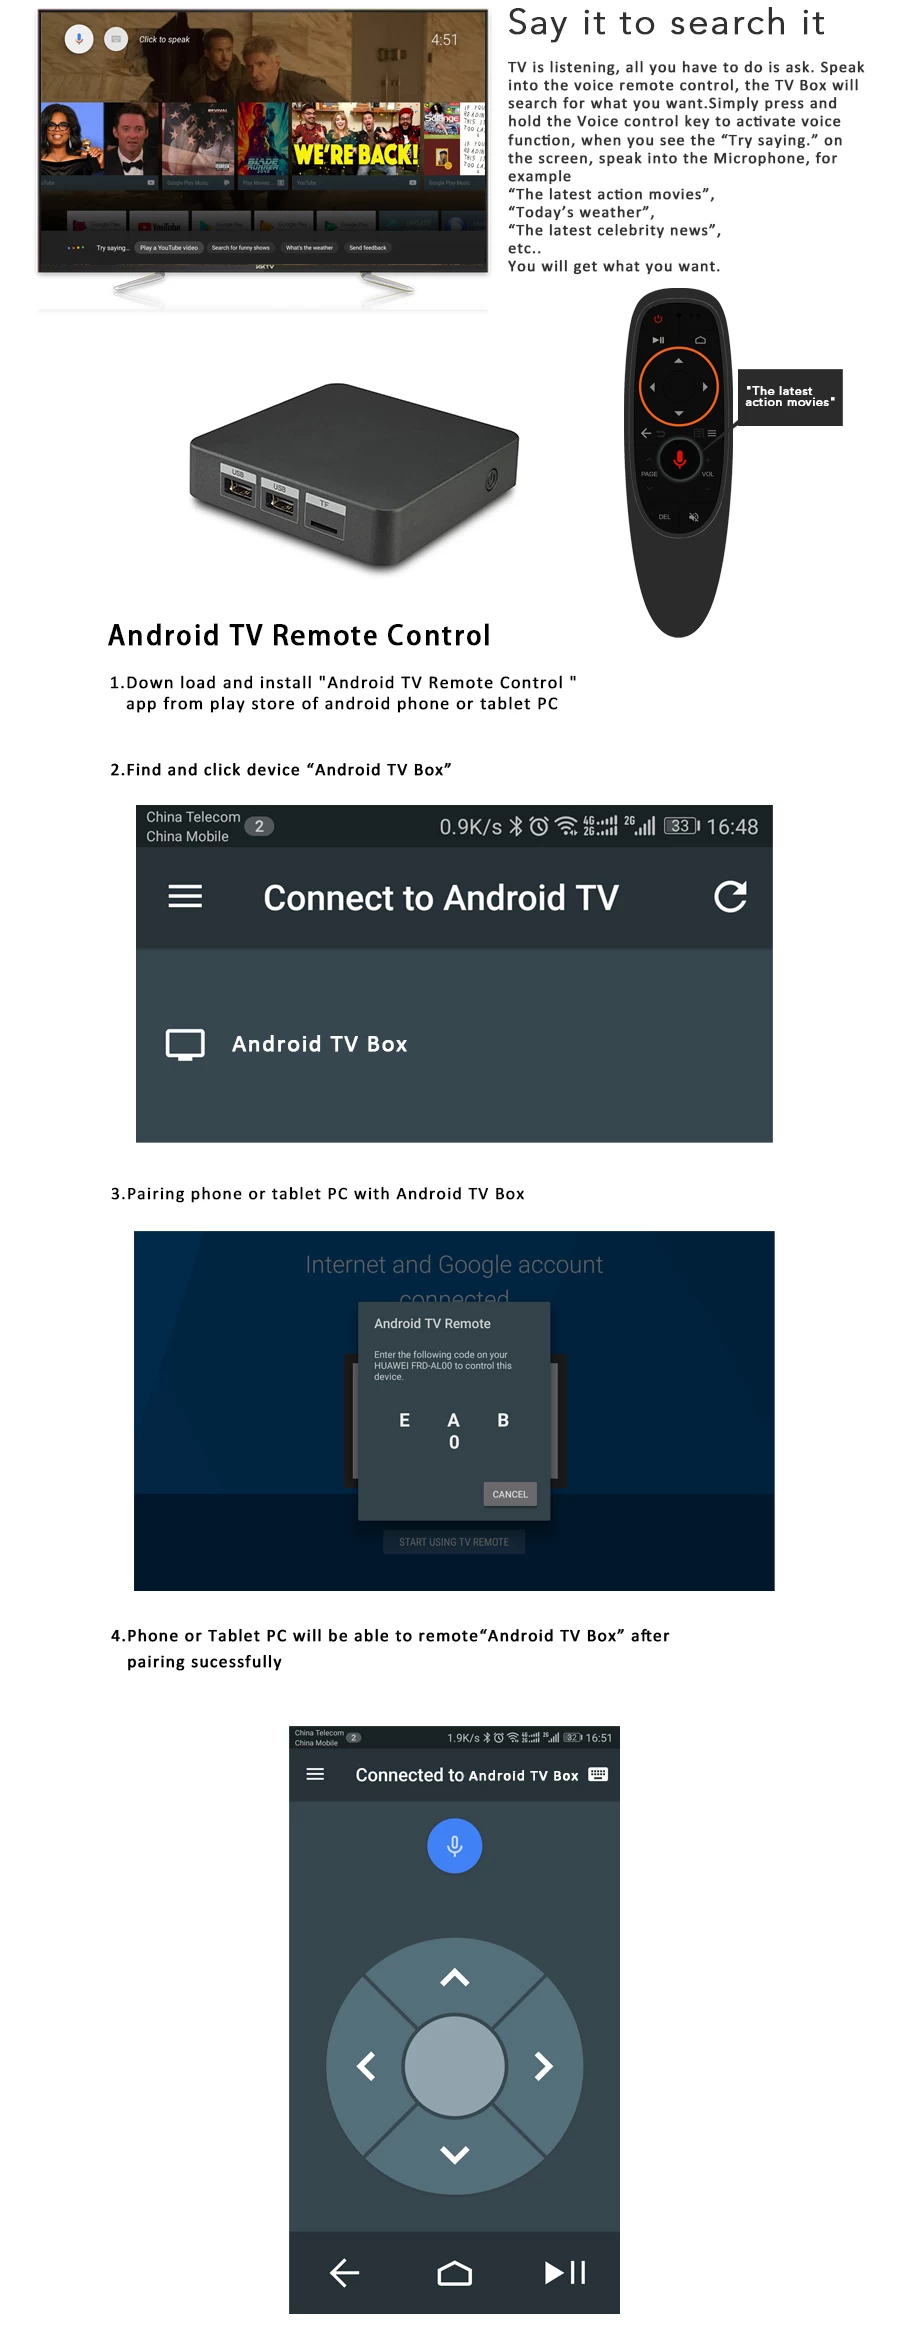 Google Assistant voice control coming to Android TV